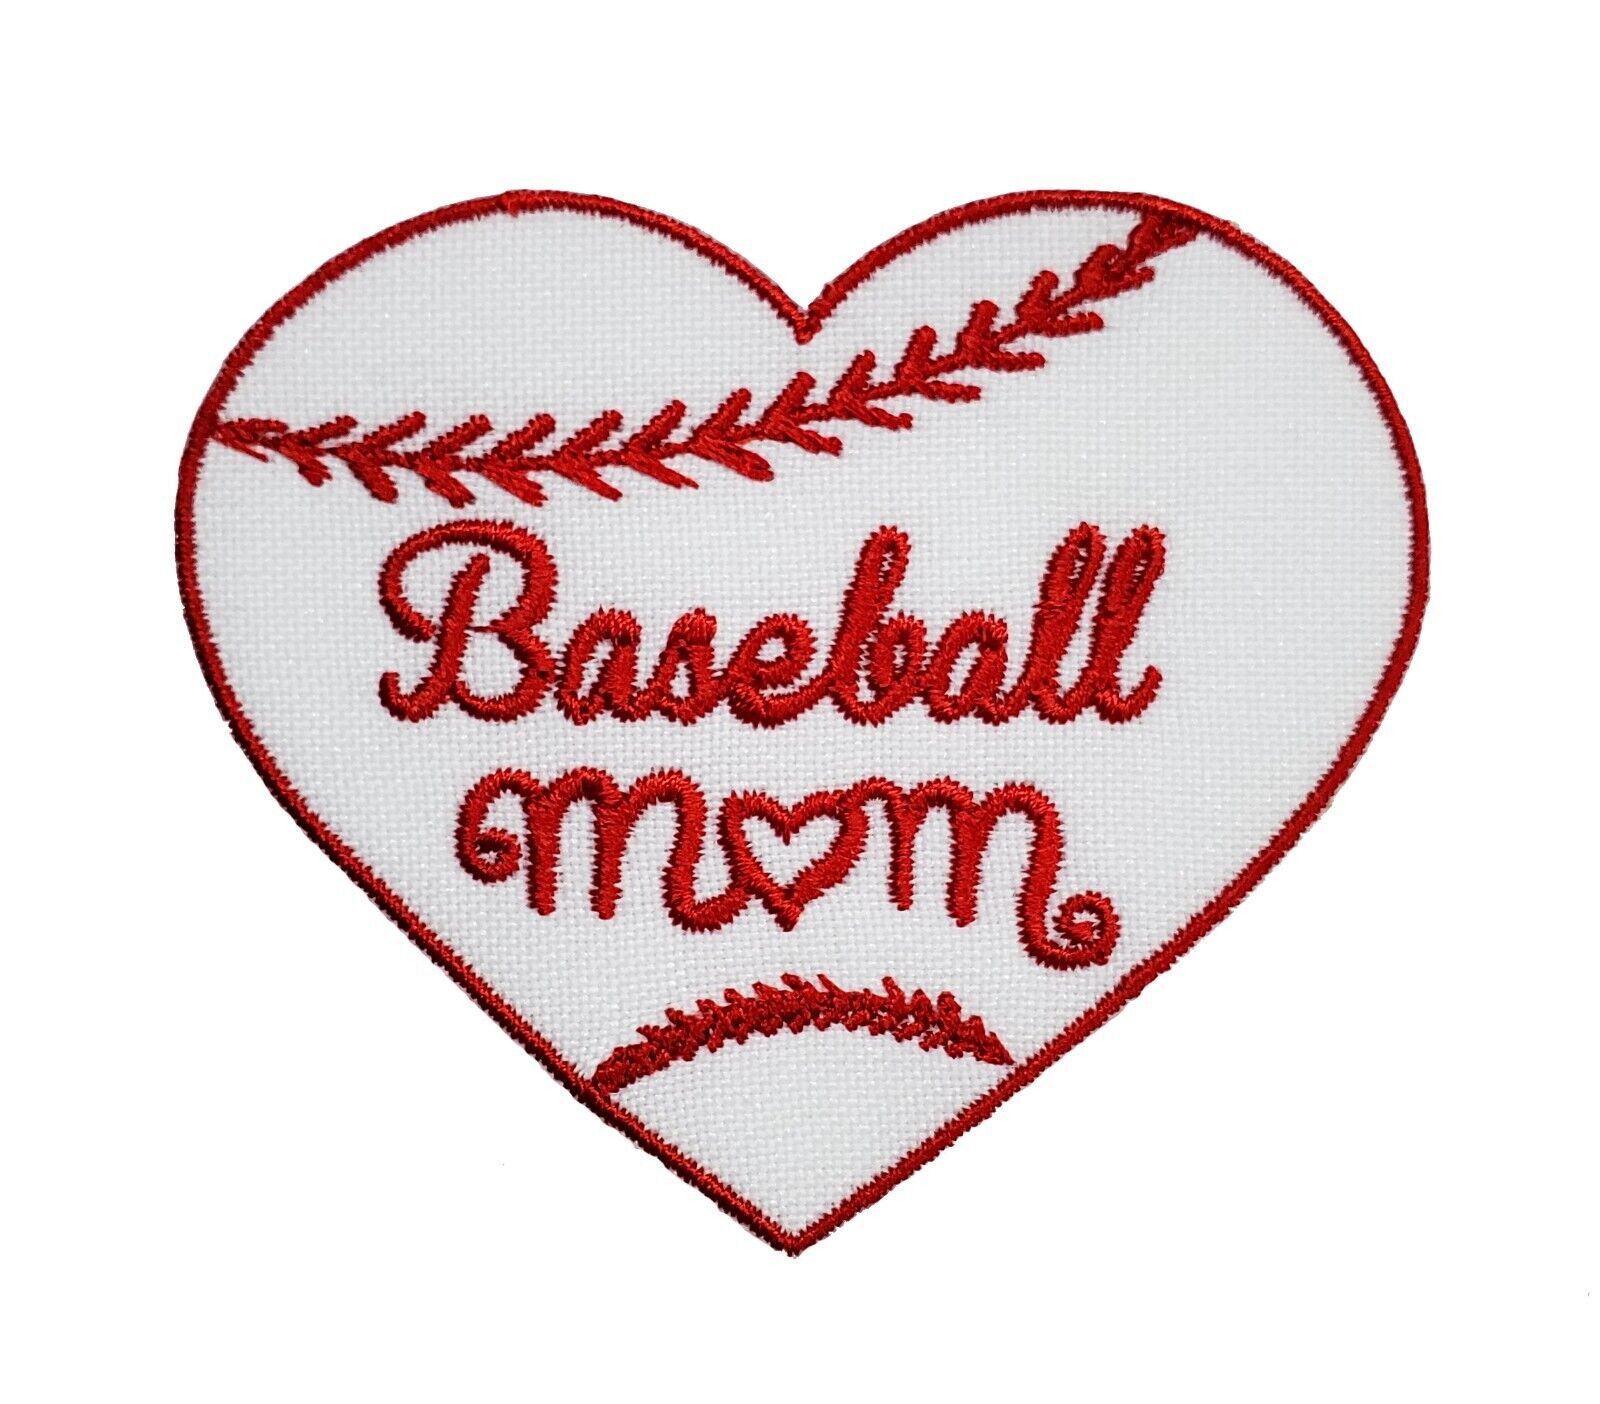 Primary image for Baseball Mom Baseball Heart Embroidered Applique Iron/Sew On Patch Sports Play